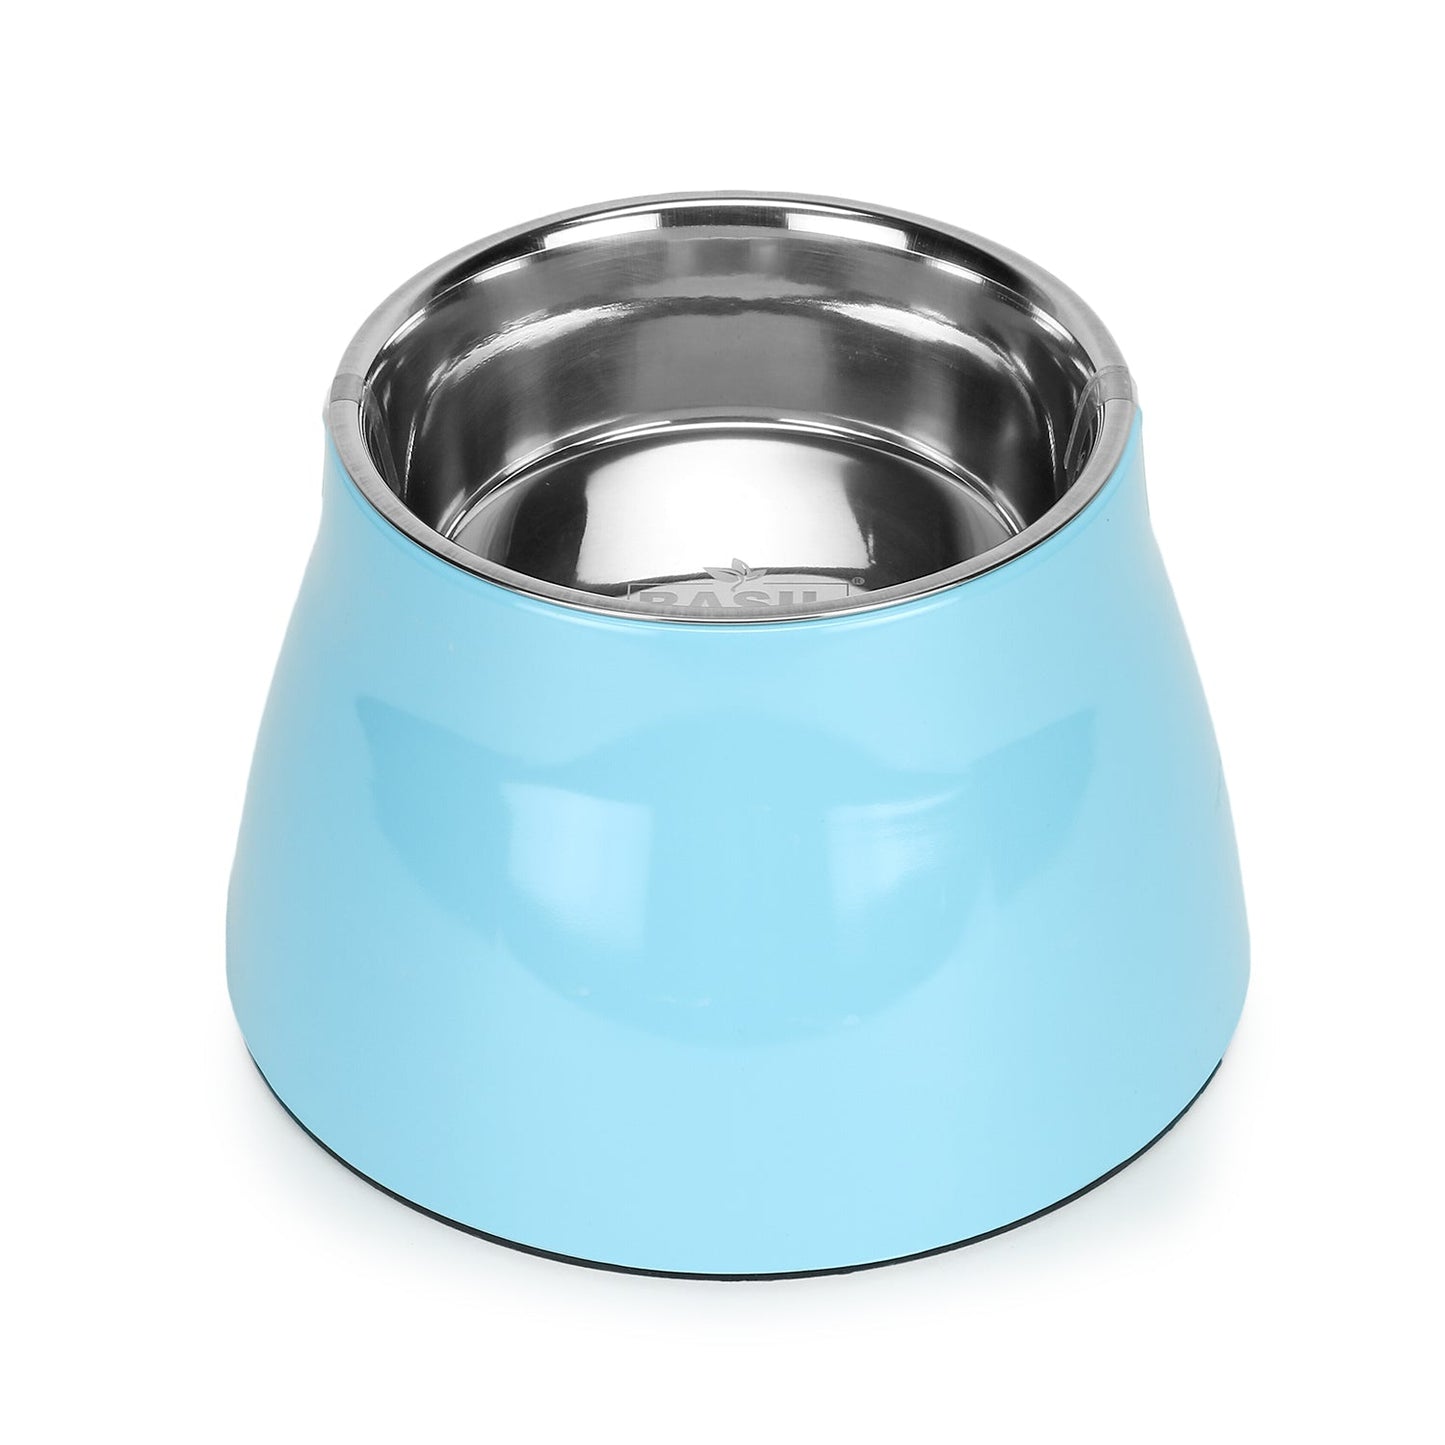 Basil Elevated Melamine and Stainless Steel Pet Feeding Bowls for Bigger Ears Dogs, 600ml (Blue)